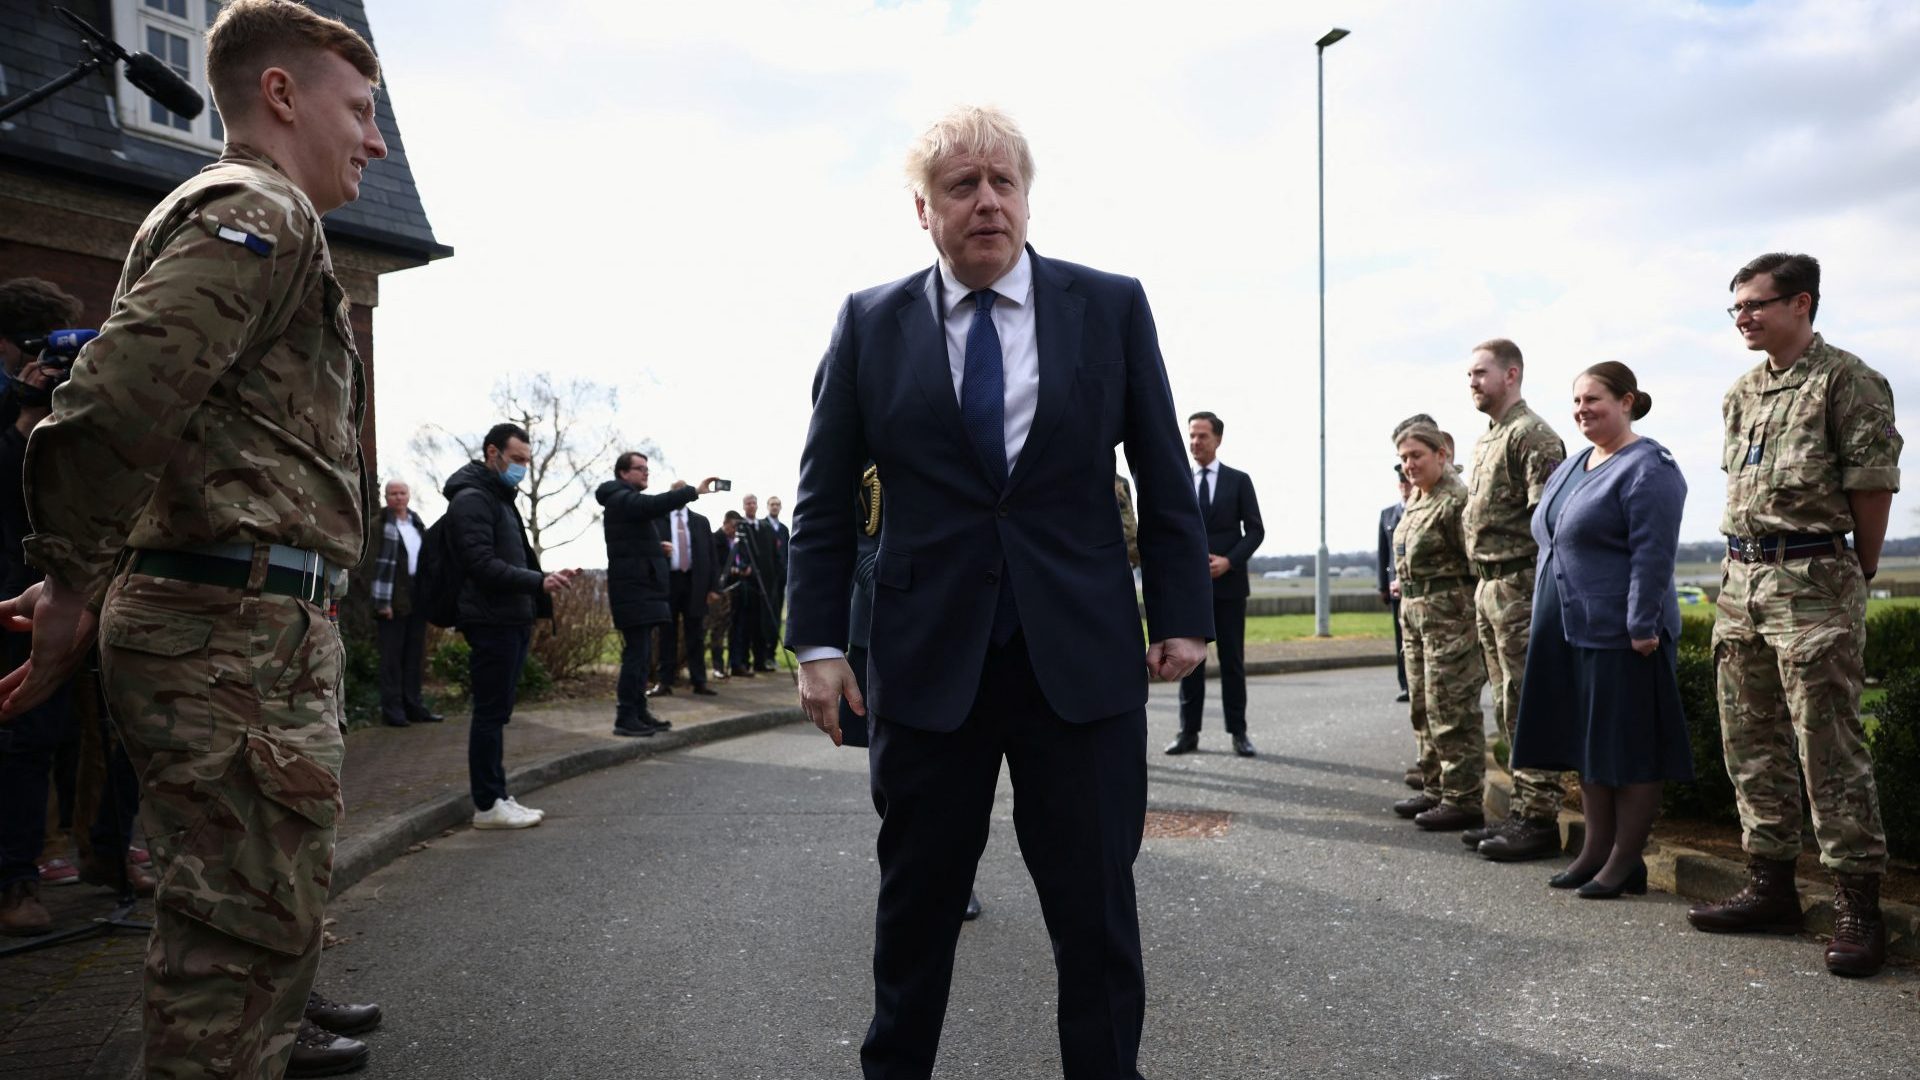 Prime Minister Boris Johnson reviews troops during a visit to at RAF Northolt. Photo:  Henry Nicholls/PA Wire/PA Images